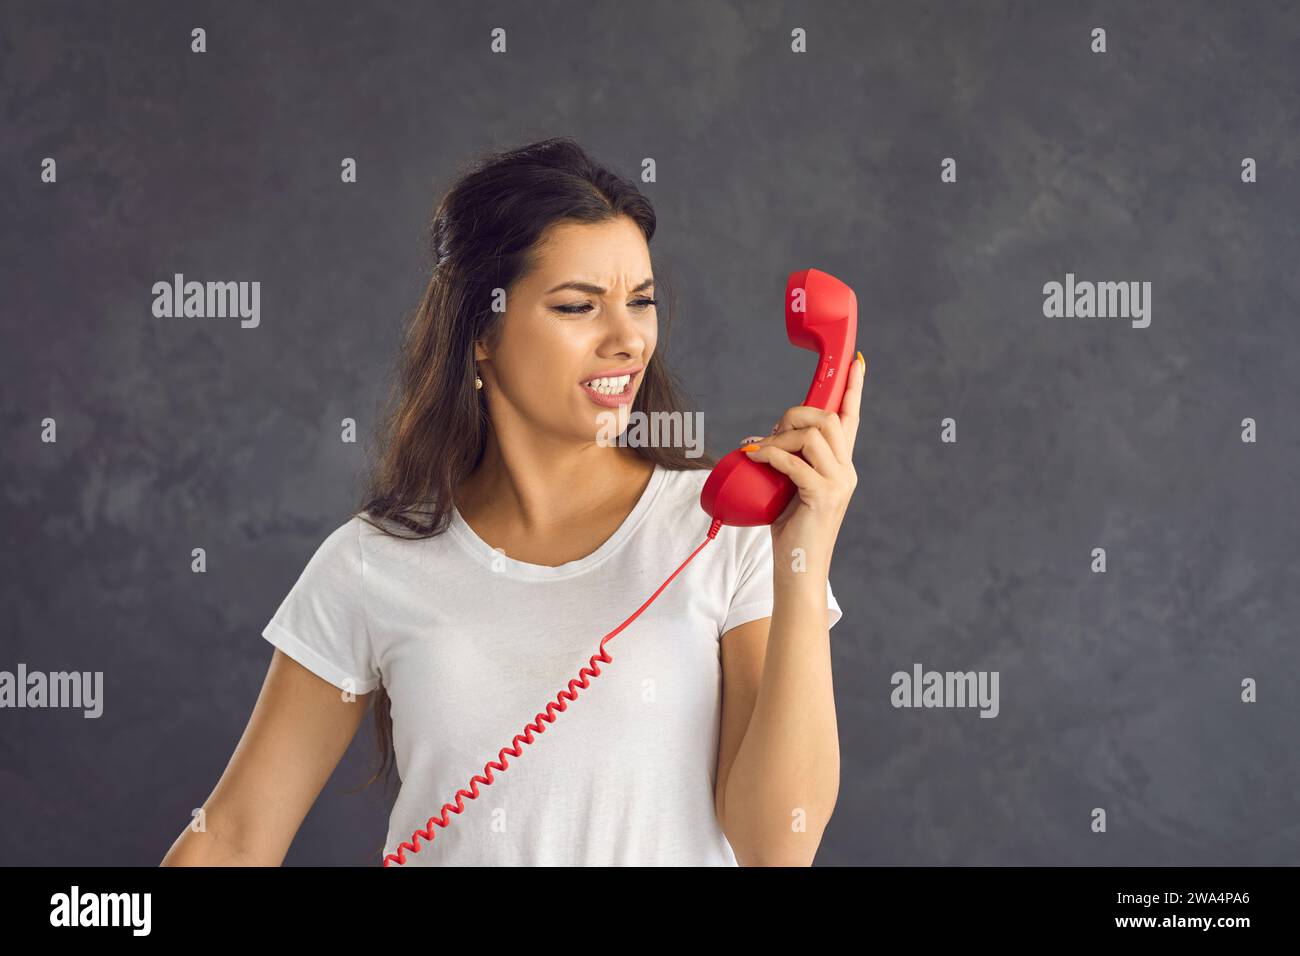 Frustrated woman standing on gray background reacts negatively to phone conversation. Stock Photo